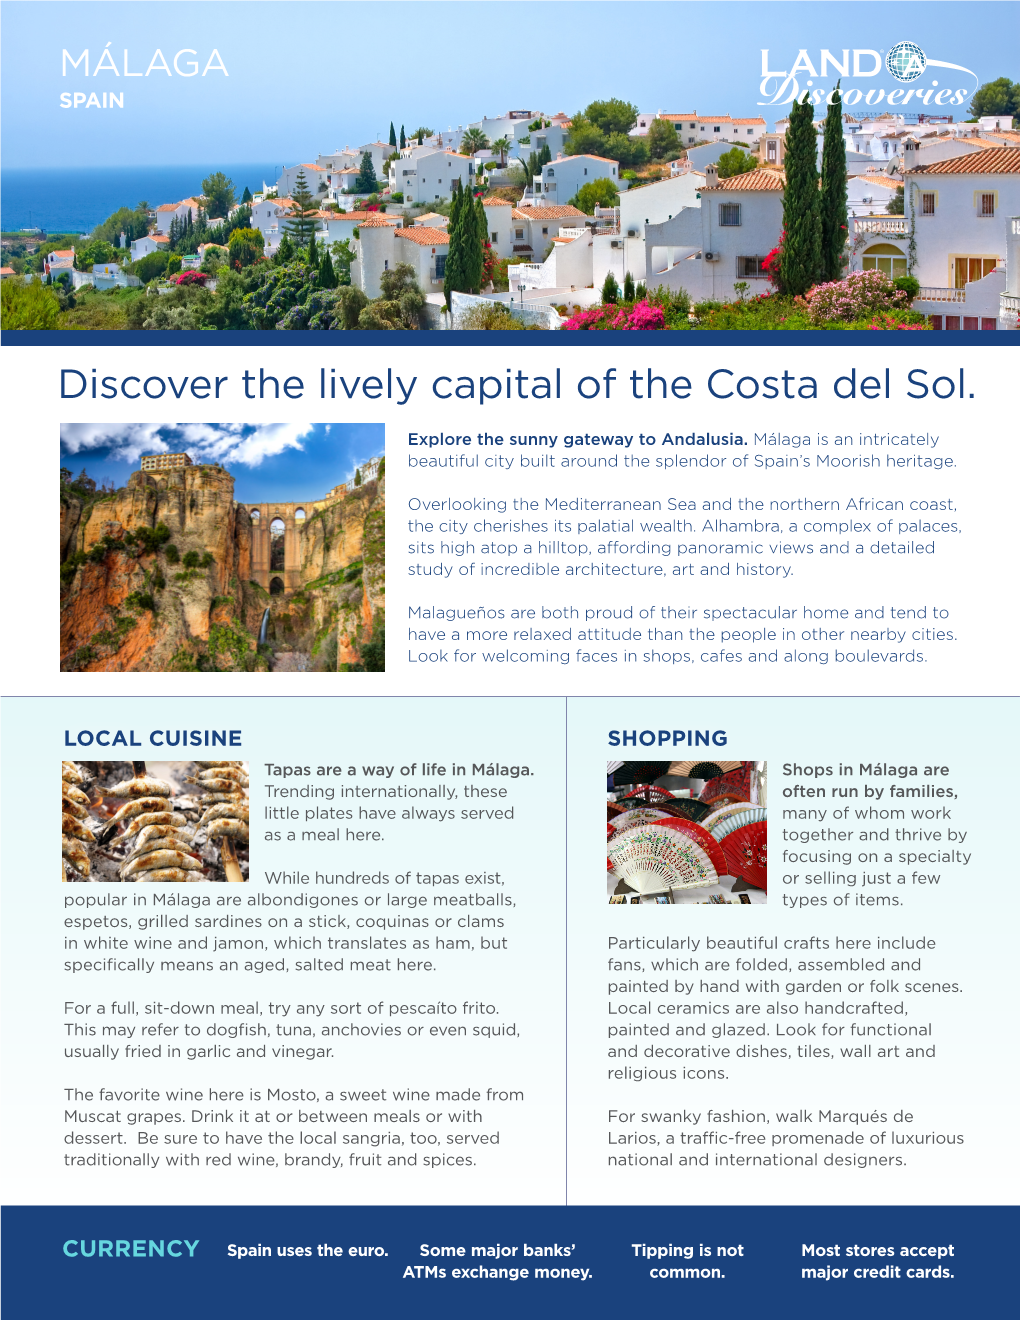 Discover the Lively Capital of the Costa Del Sol